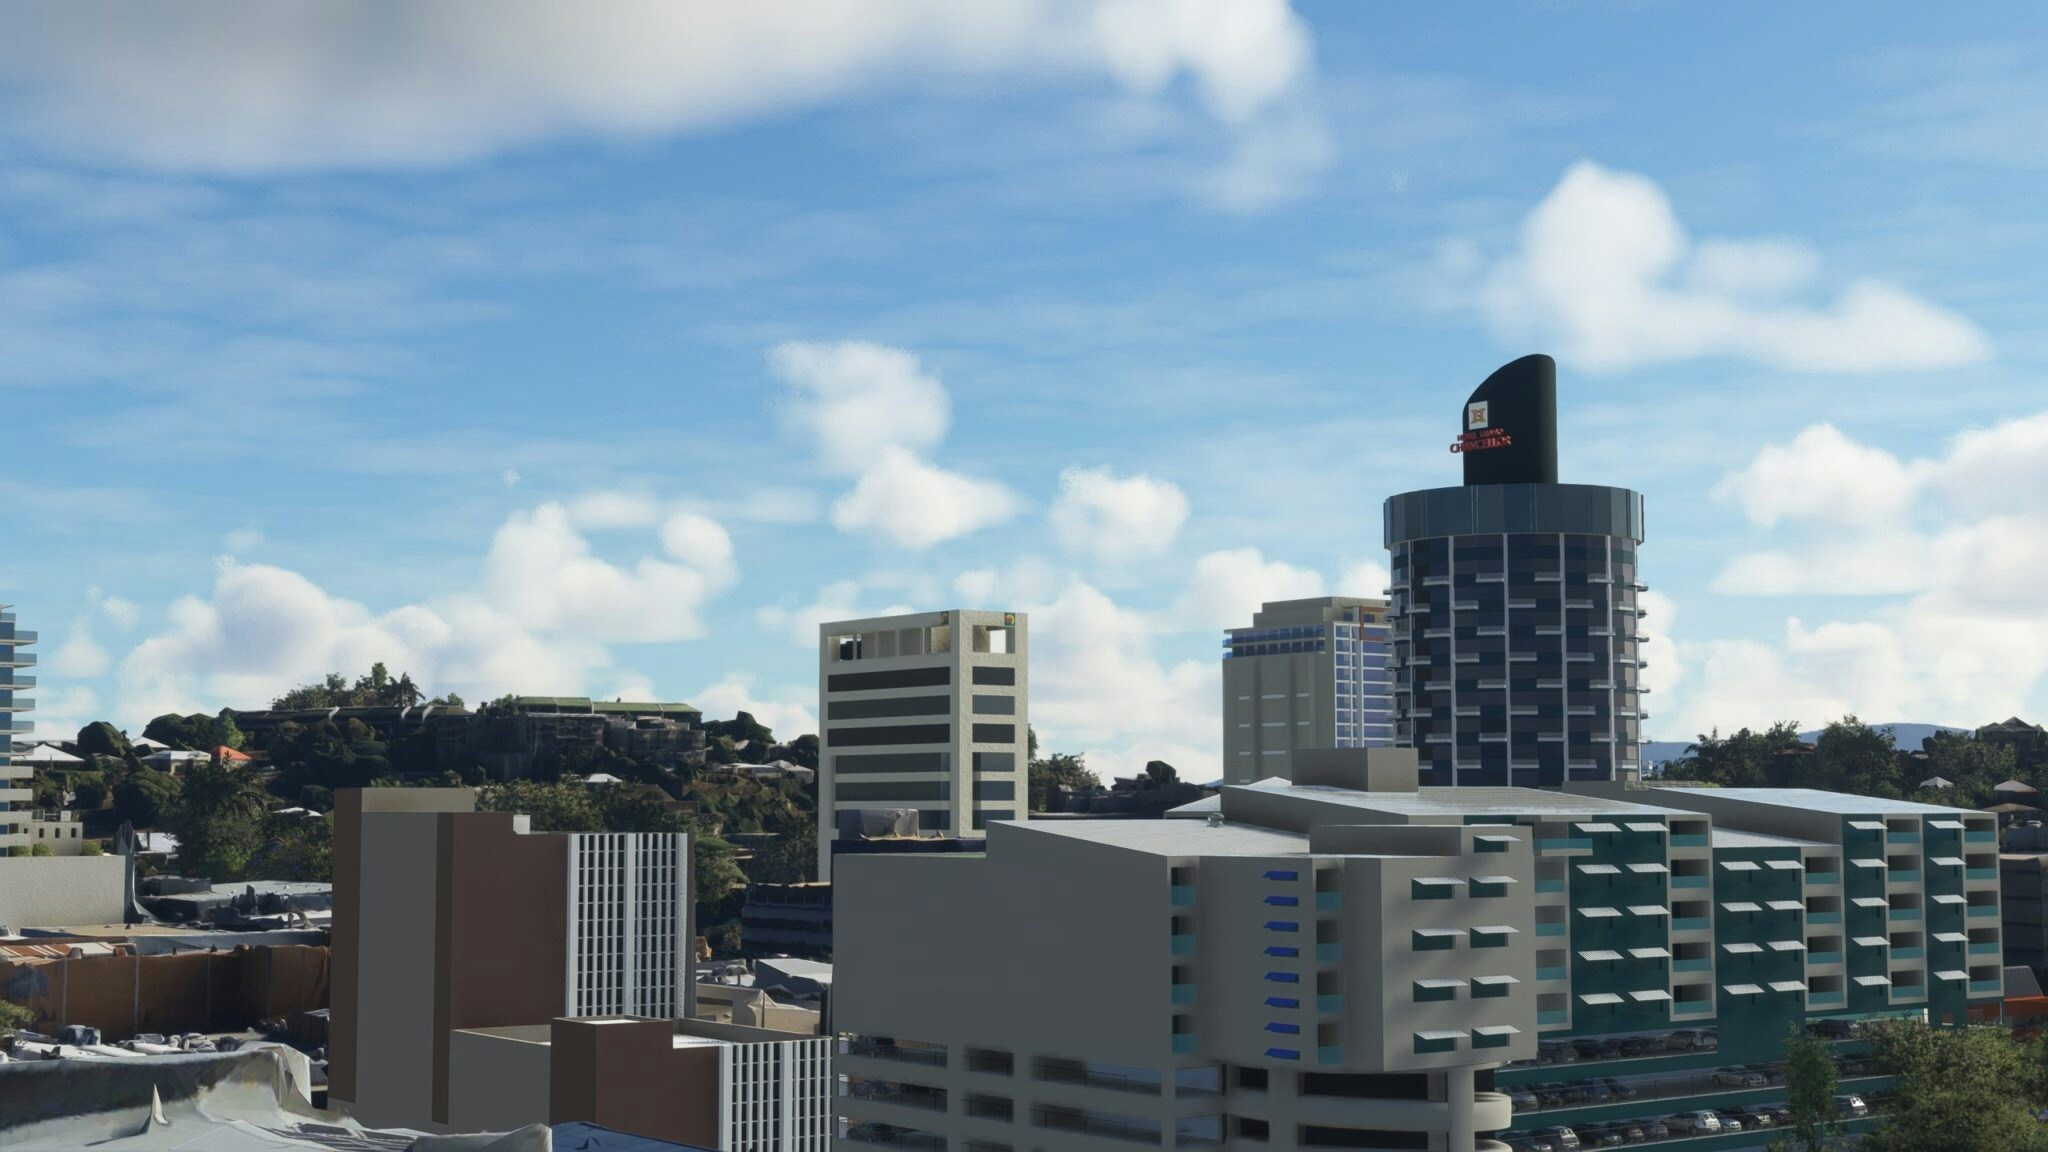 Impulse Simulations Releases Landmarks Townsville for MSFS